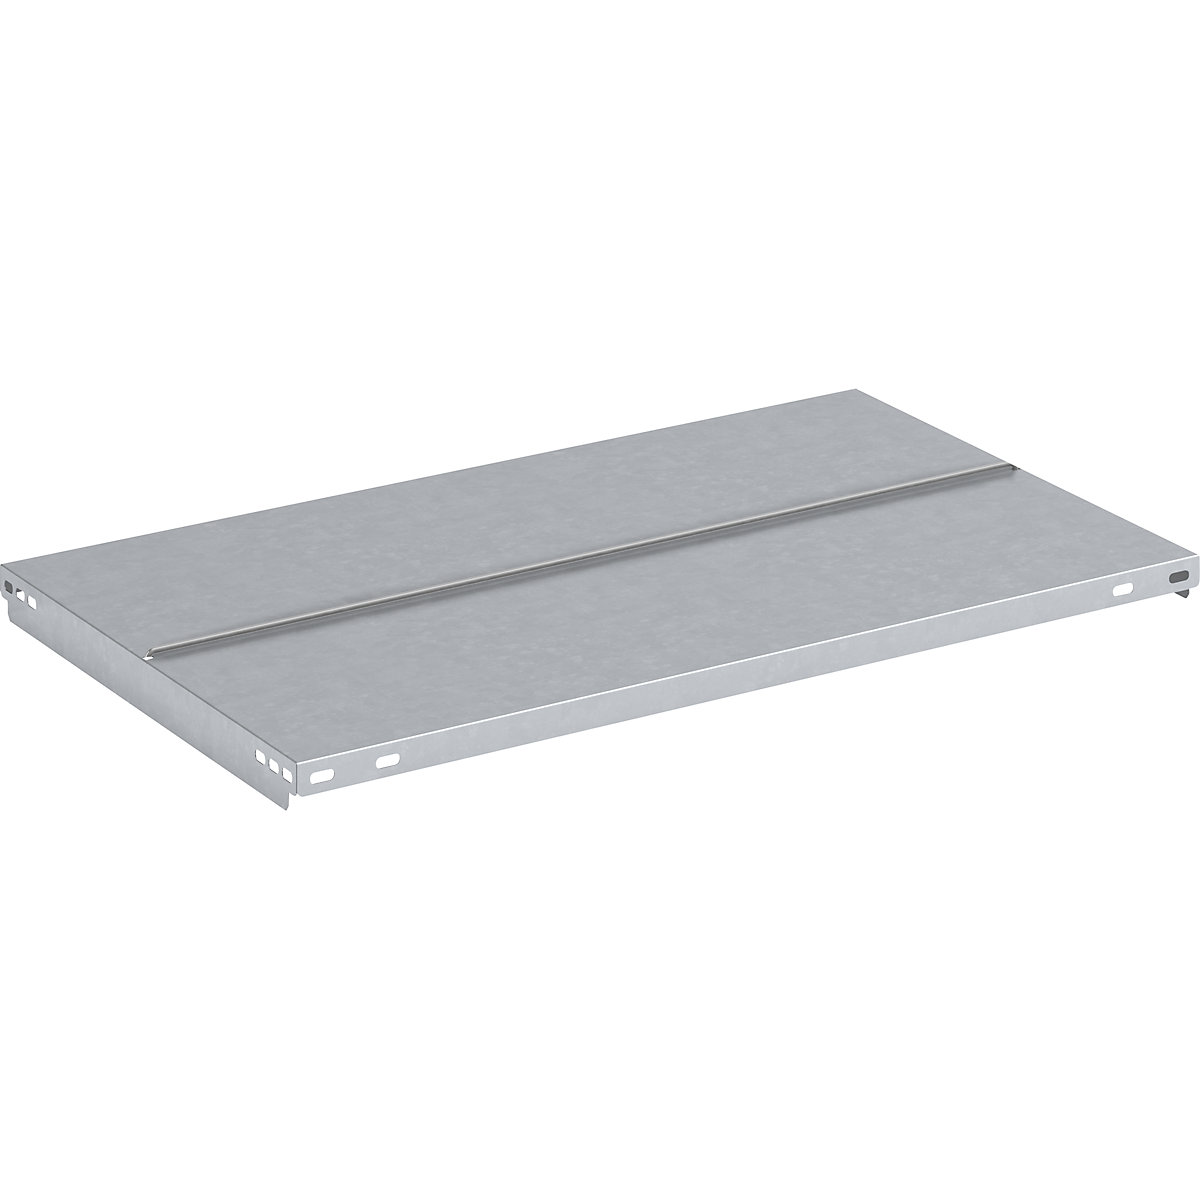 Shelf with supports – hofe, zinc plated, WxD 750 x 600 mm-2